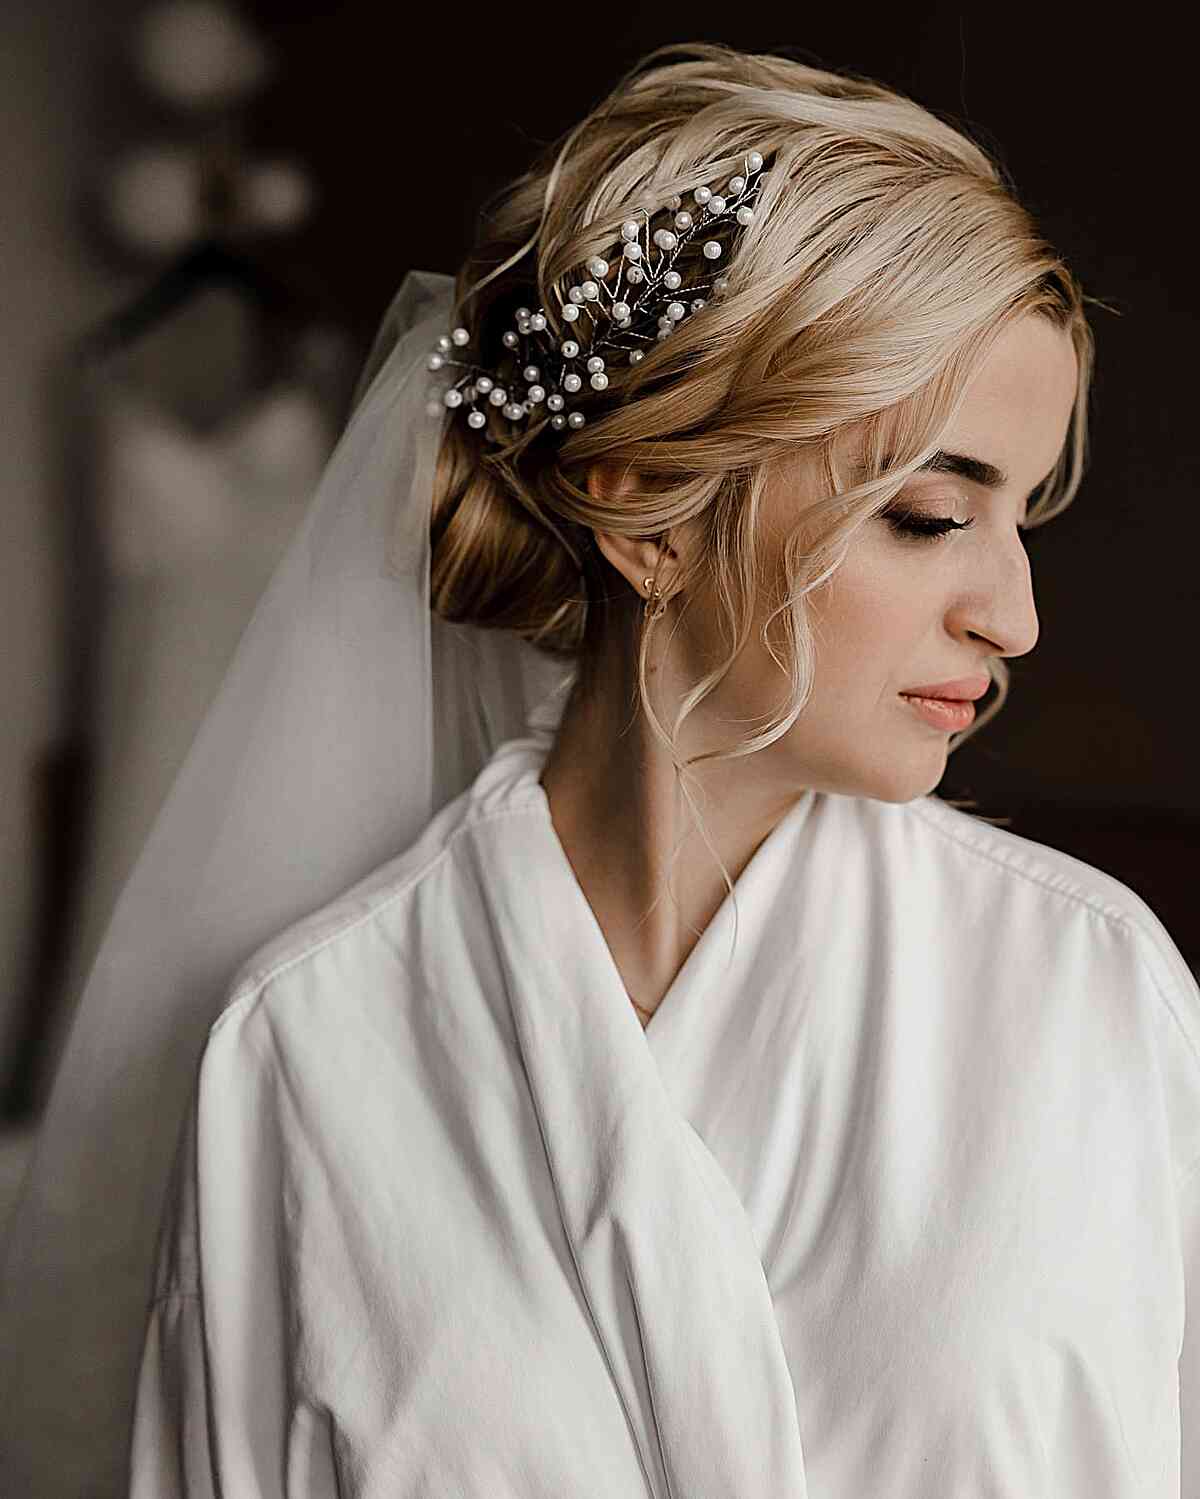 Elegant Short Updo with Accessories for a Wedding